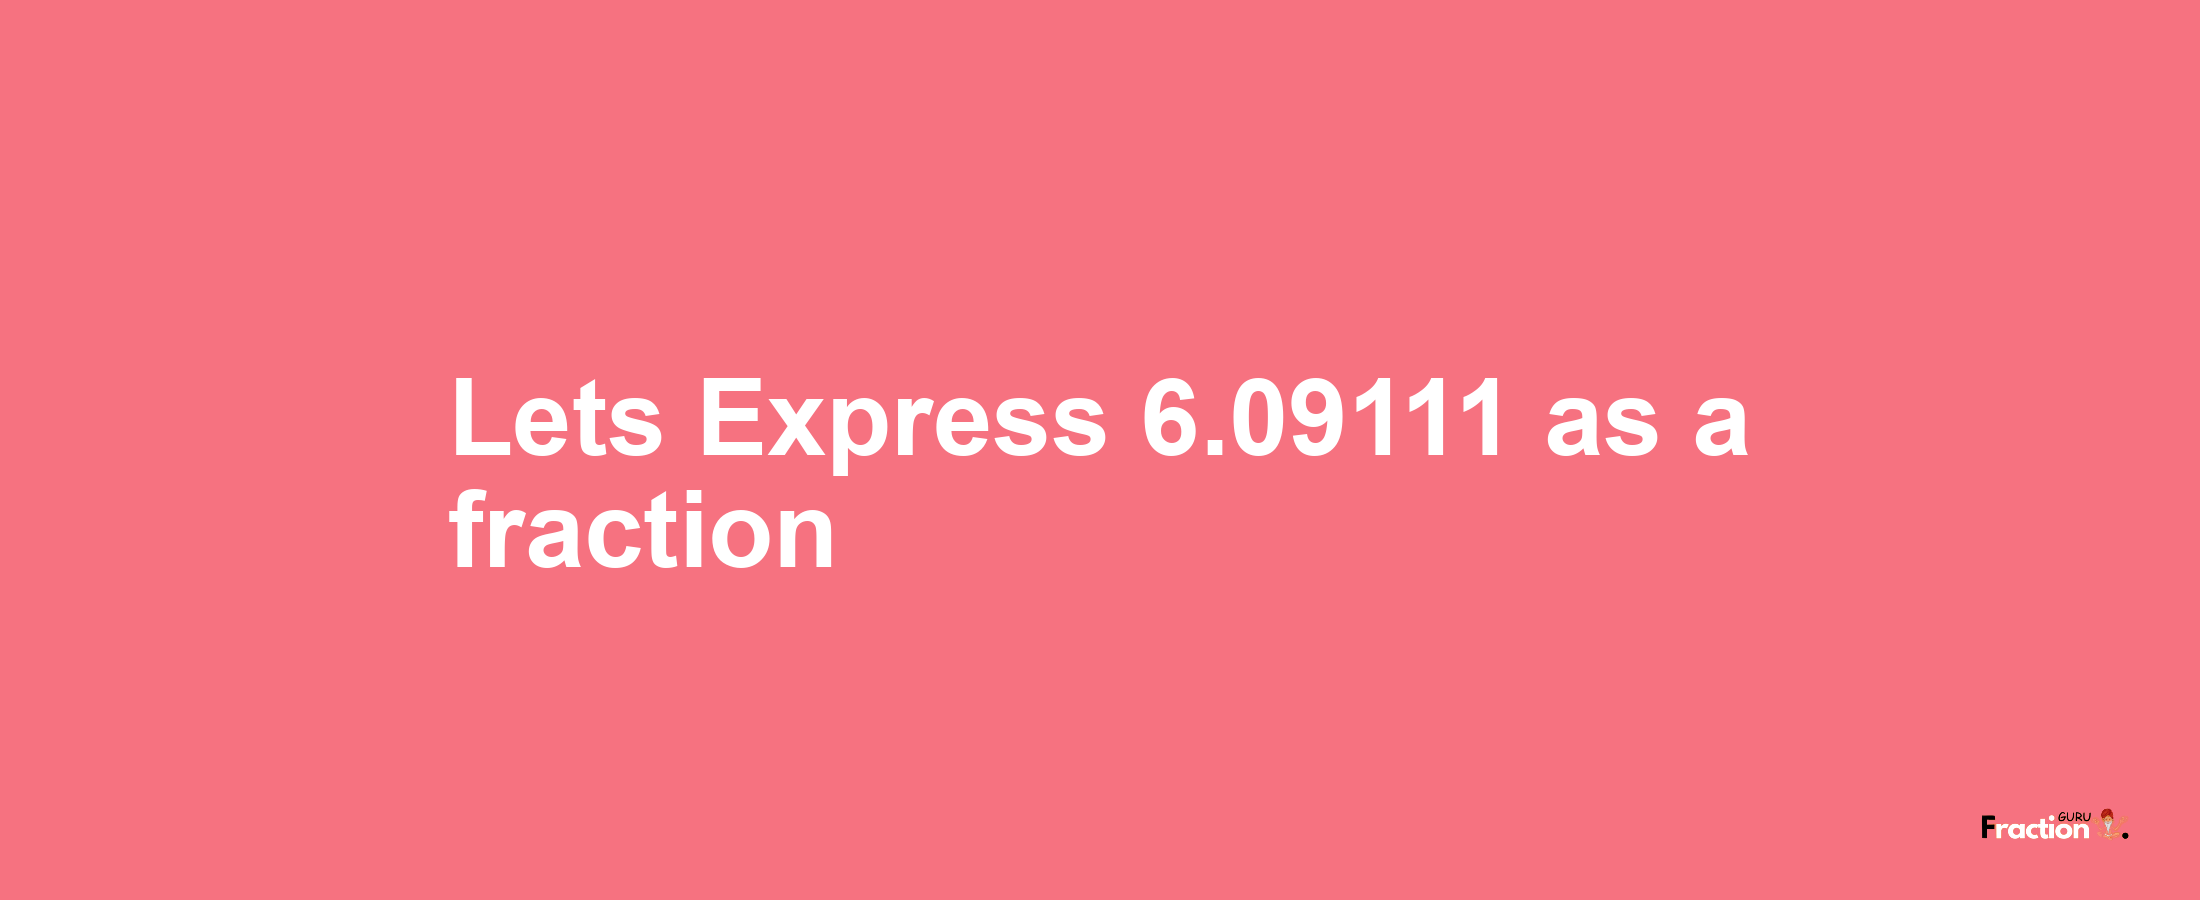 Lets Express 6.09111 as afraction